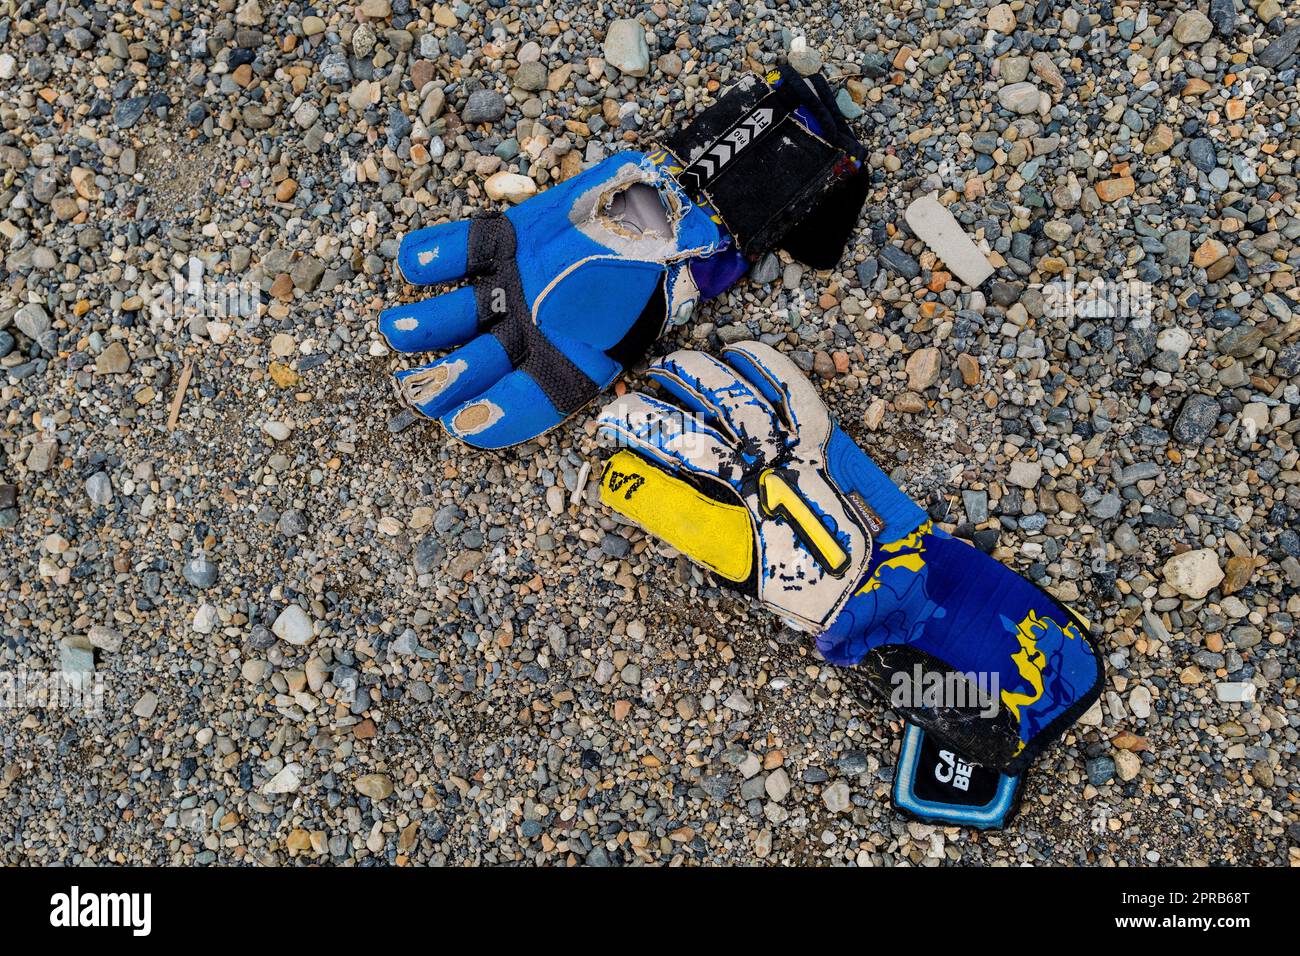 A pair of worn out goalkeeper’s gloves is seen lying on a dirt playing field during a football match in Quibdó, Chocó, Colombia. Stock Photo